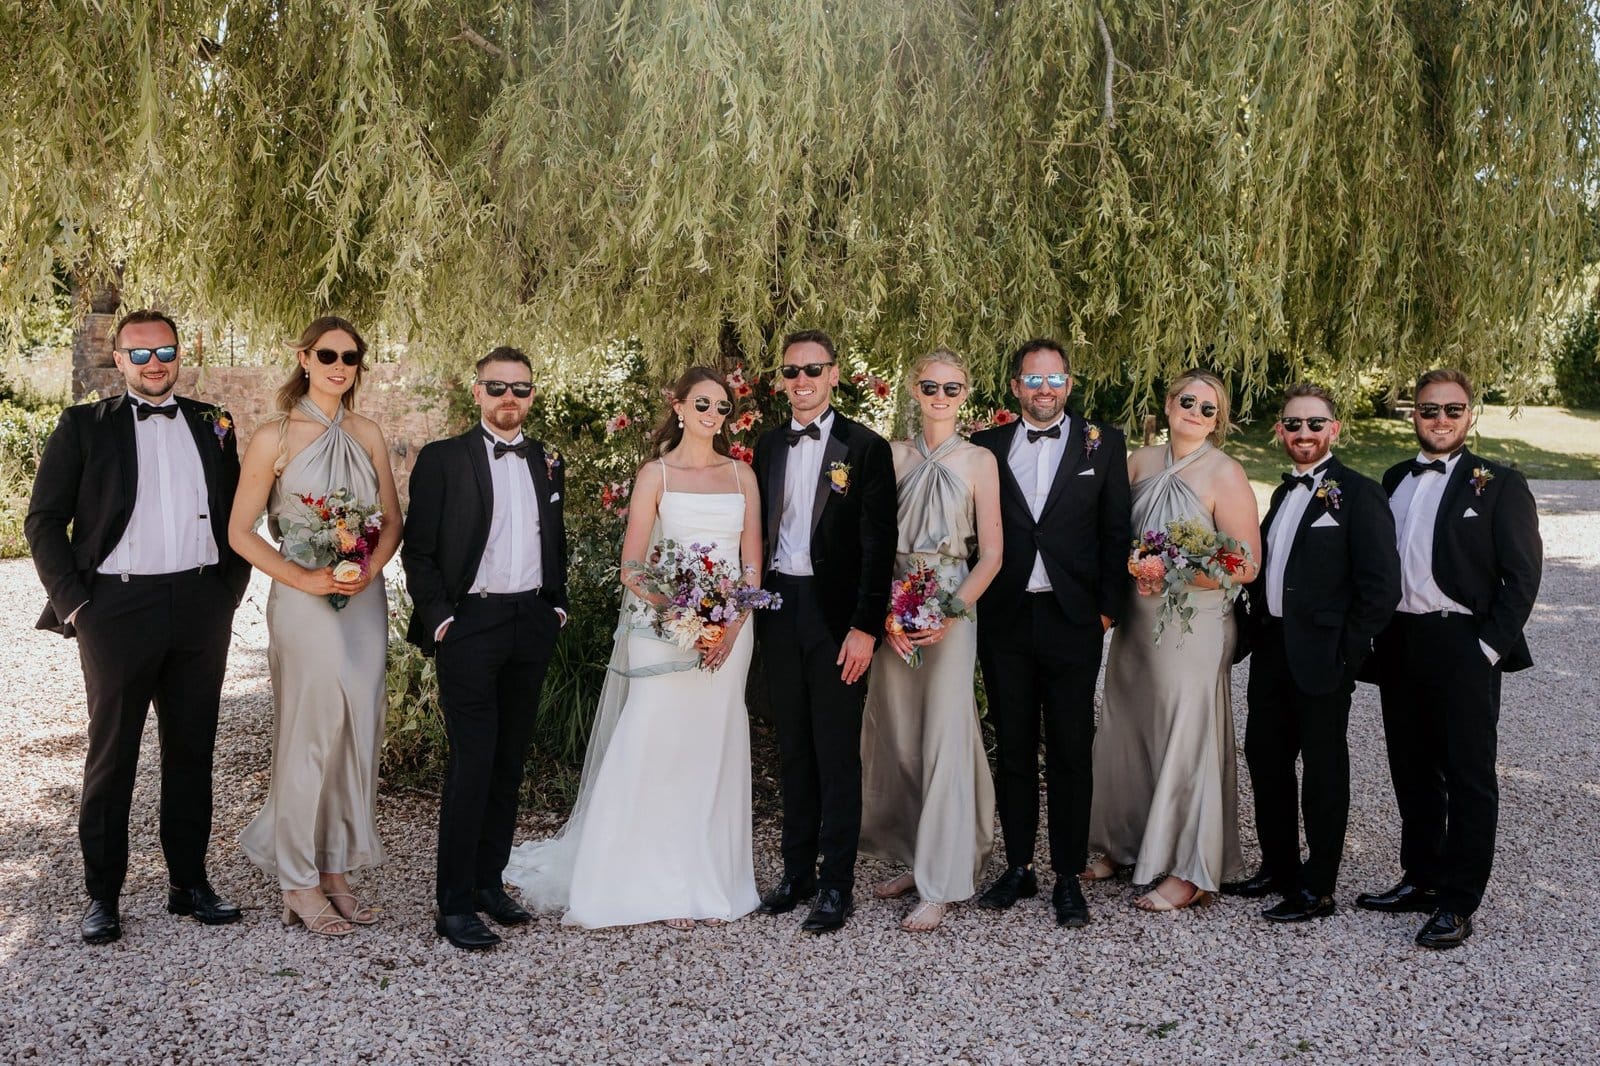 Group shot with sunglasses